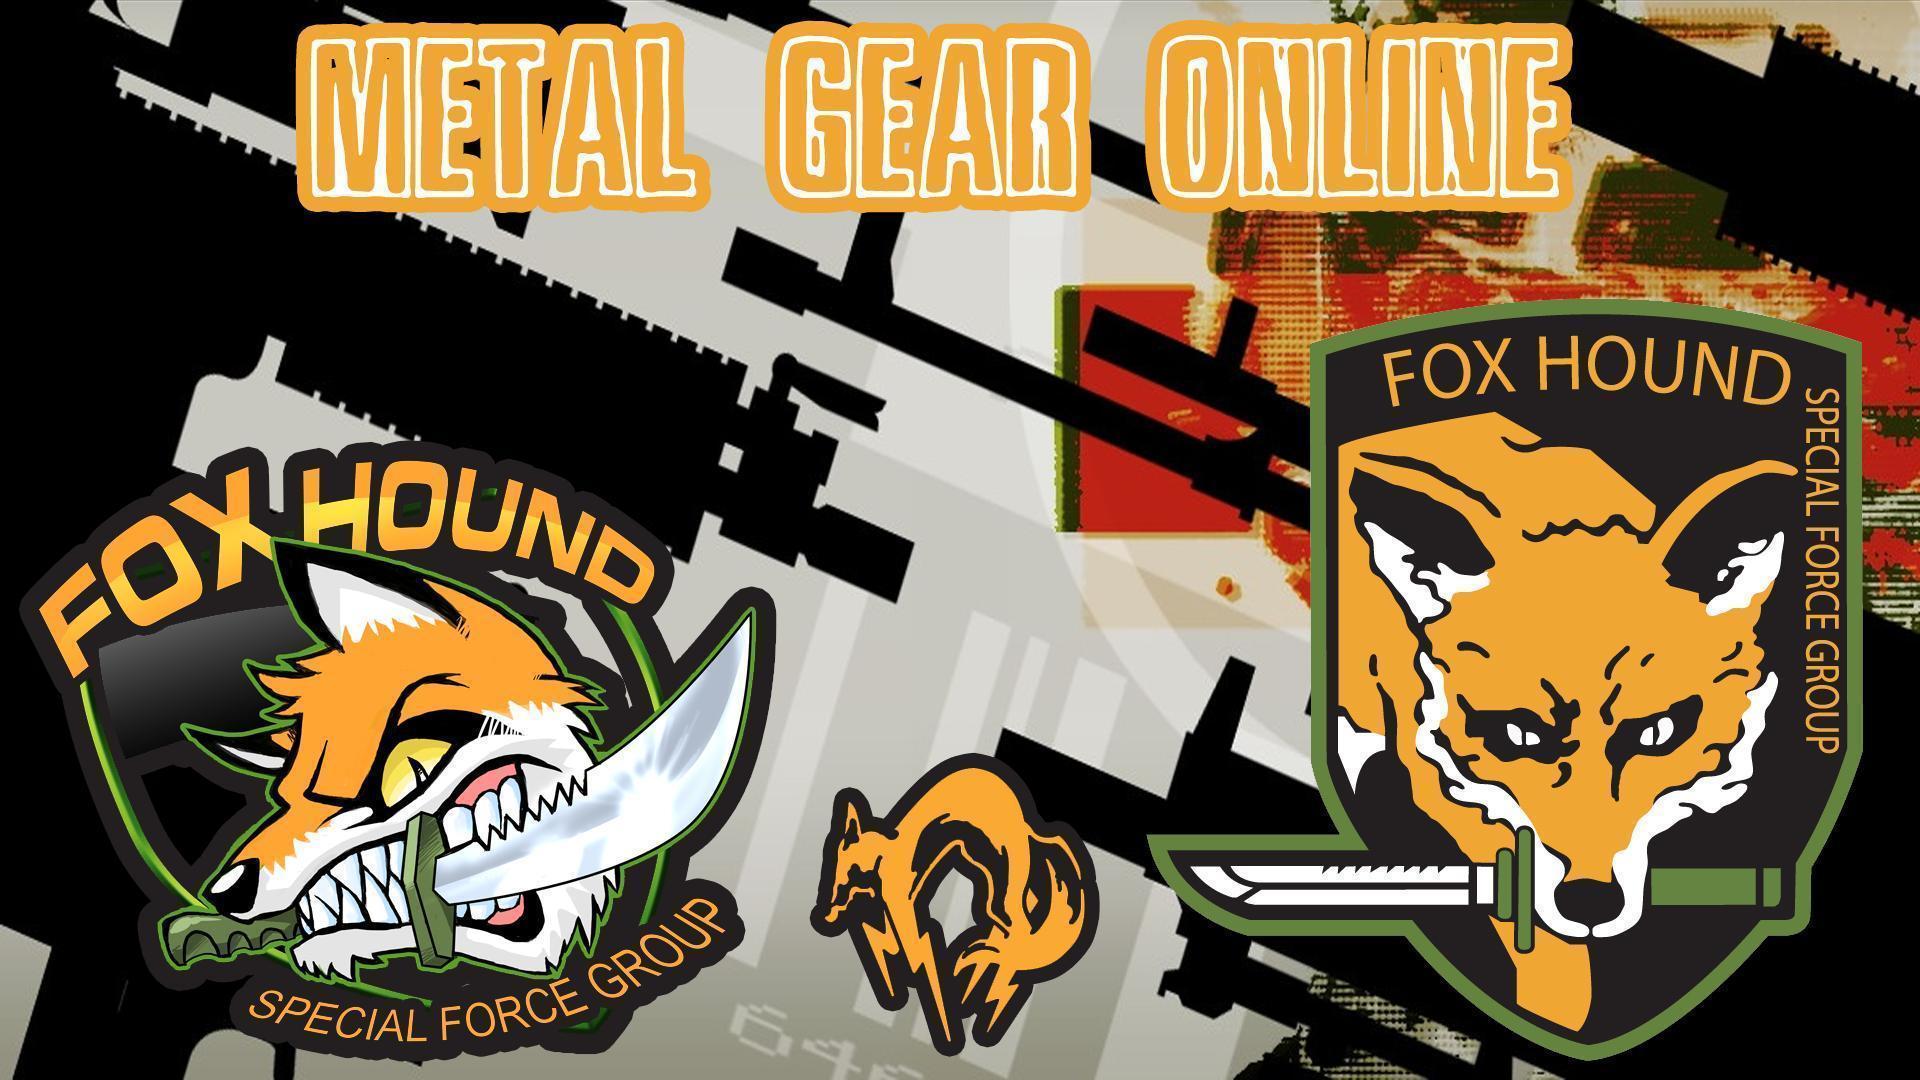 Foxhound Wallpaper 1920 X 1080 By ICEMAN 187